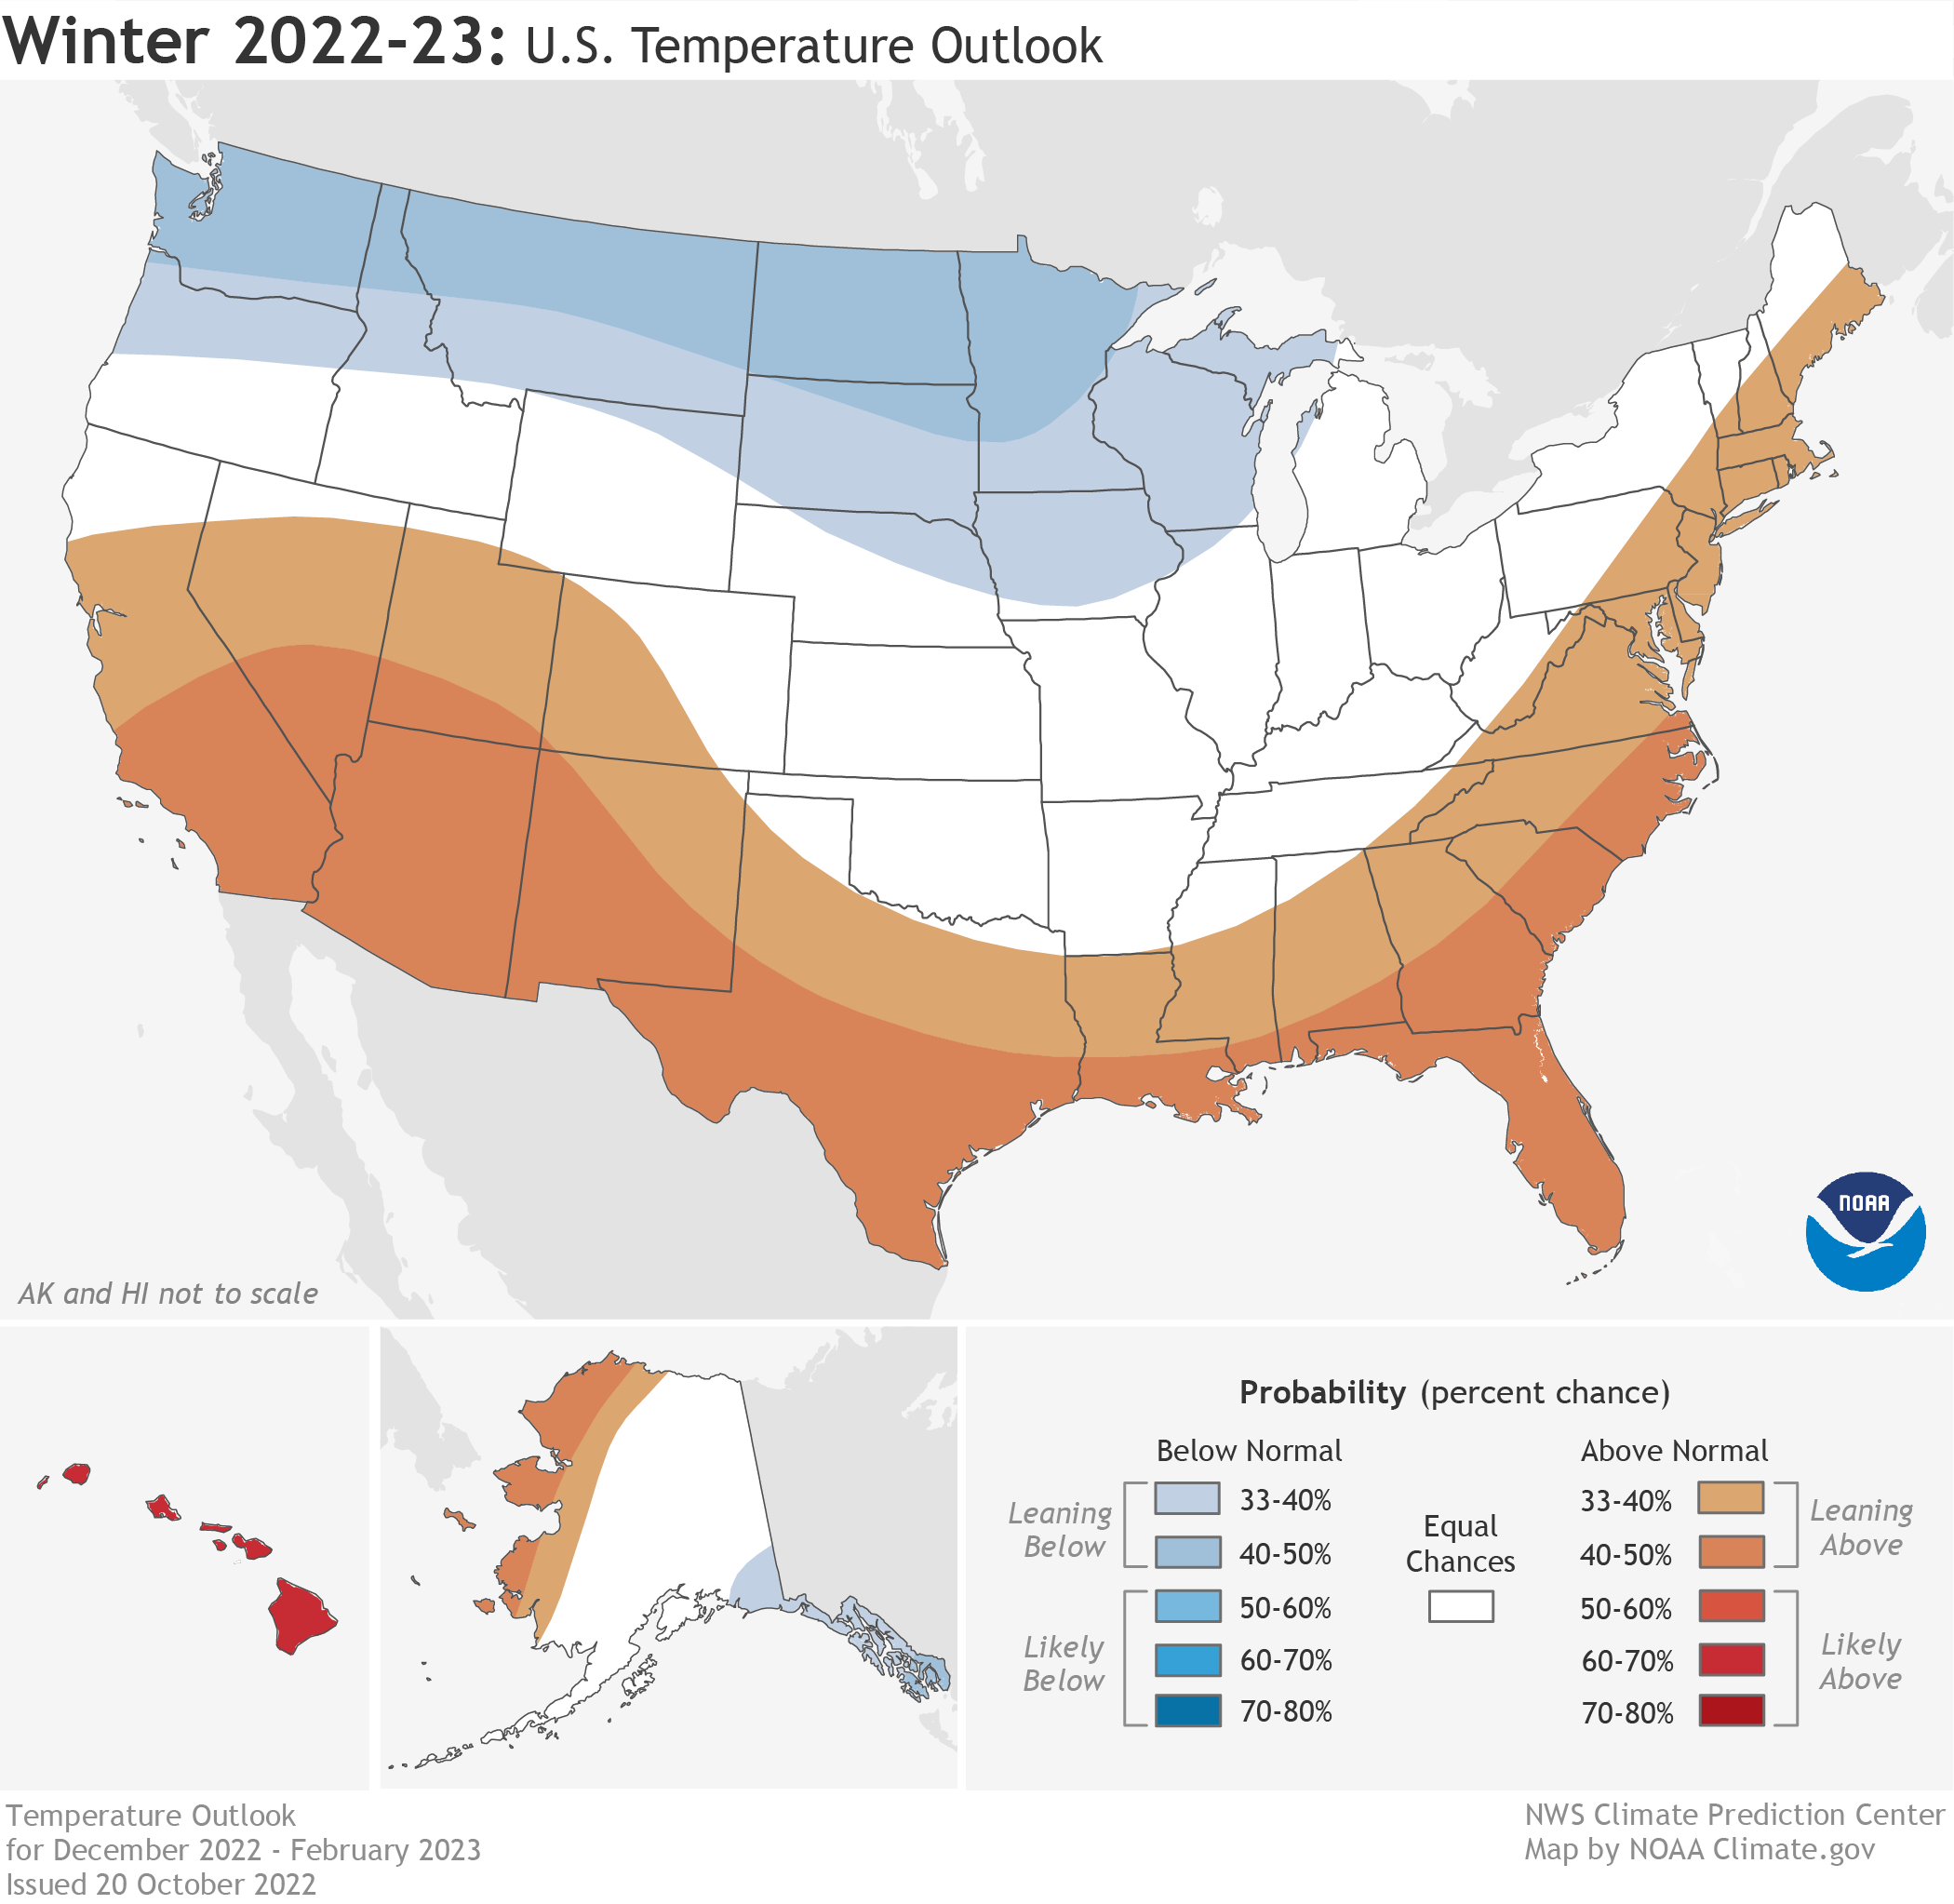 NOAA Releases 20222023 U.S. Winter Outlook Warmer, Drier South with